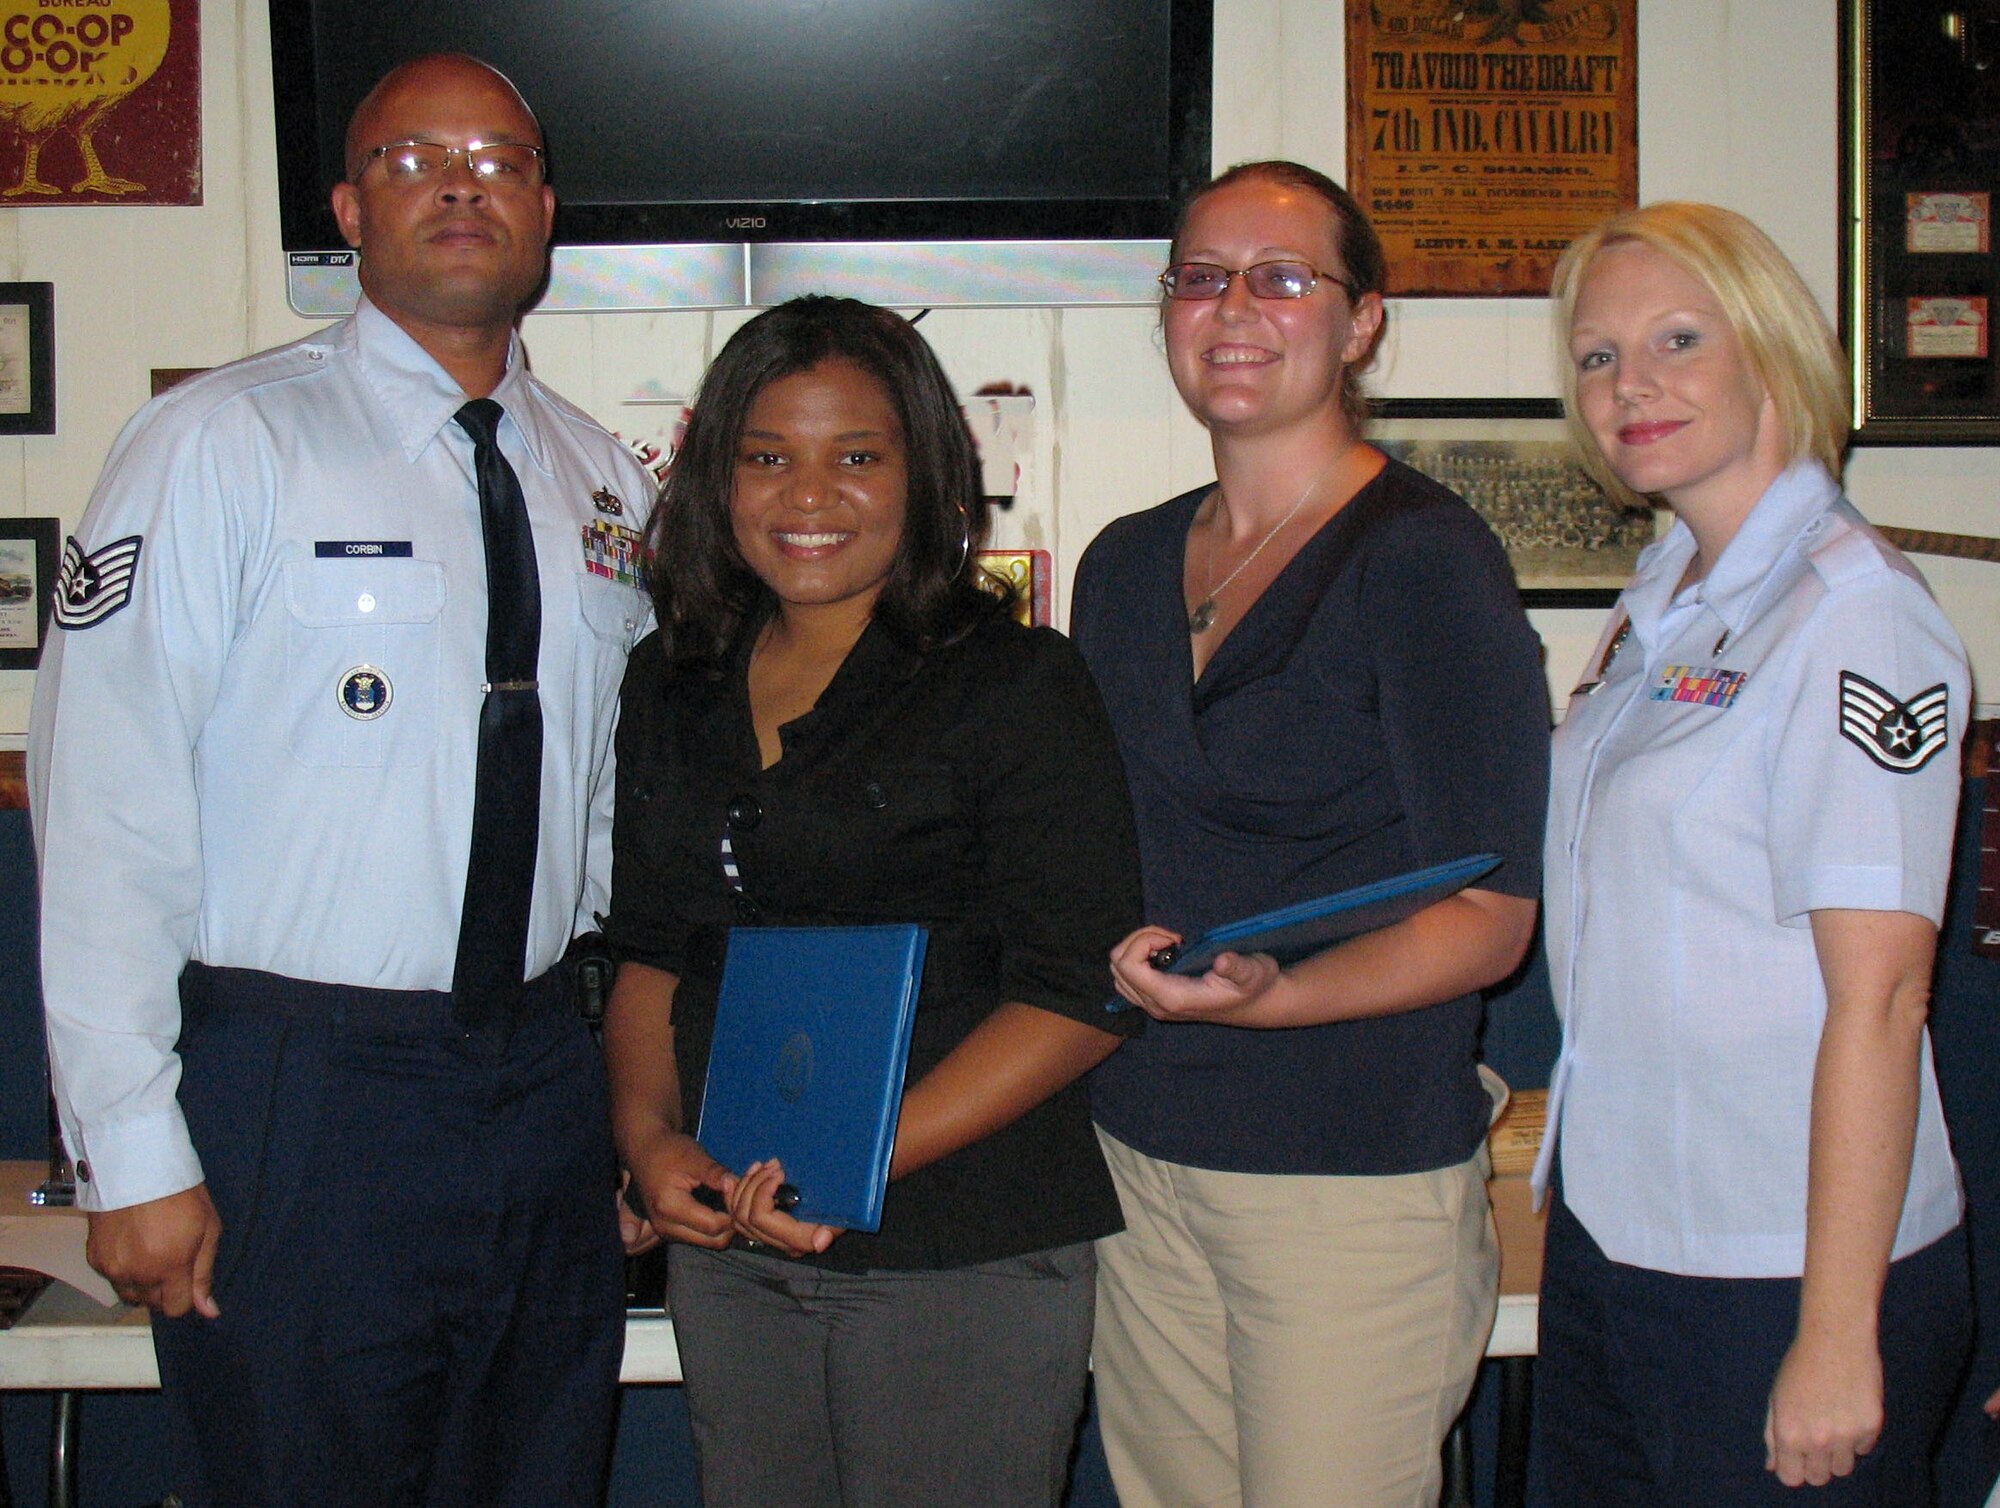 (From left to right) Tech. Sgt. LaCanta Corbin, 341st Recruiting Squadron recruiter; Ms. Romana McKinley; Ms. Adrienne Devore; and Staff Sgt. Cheryl Vercellona, 341st RCS recruiter. Ms. McKinley and Ms. Devore were recently recognized for their support of the Air Force recruiting mission. The future Airmen have been mentoring 10 other potential Air Force applicants and have increased their Armed Services Vocational Aptitude Battery test scores by an average of 18-points. (U.S. Air Force photo/Tech. Sgt. Derek Rivera) 